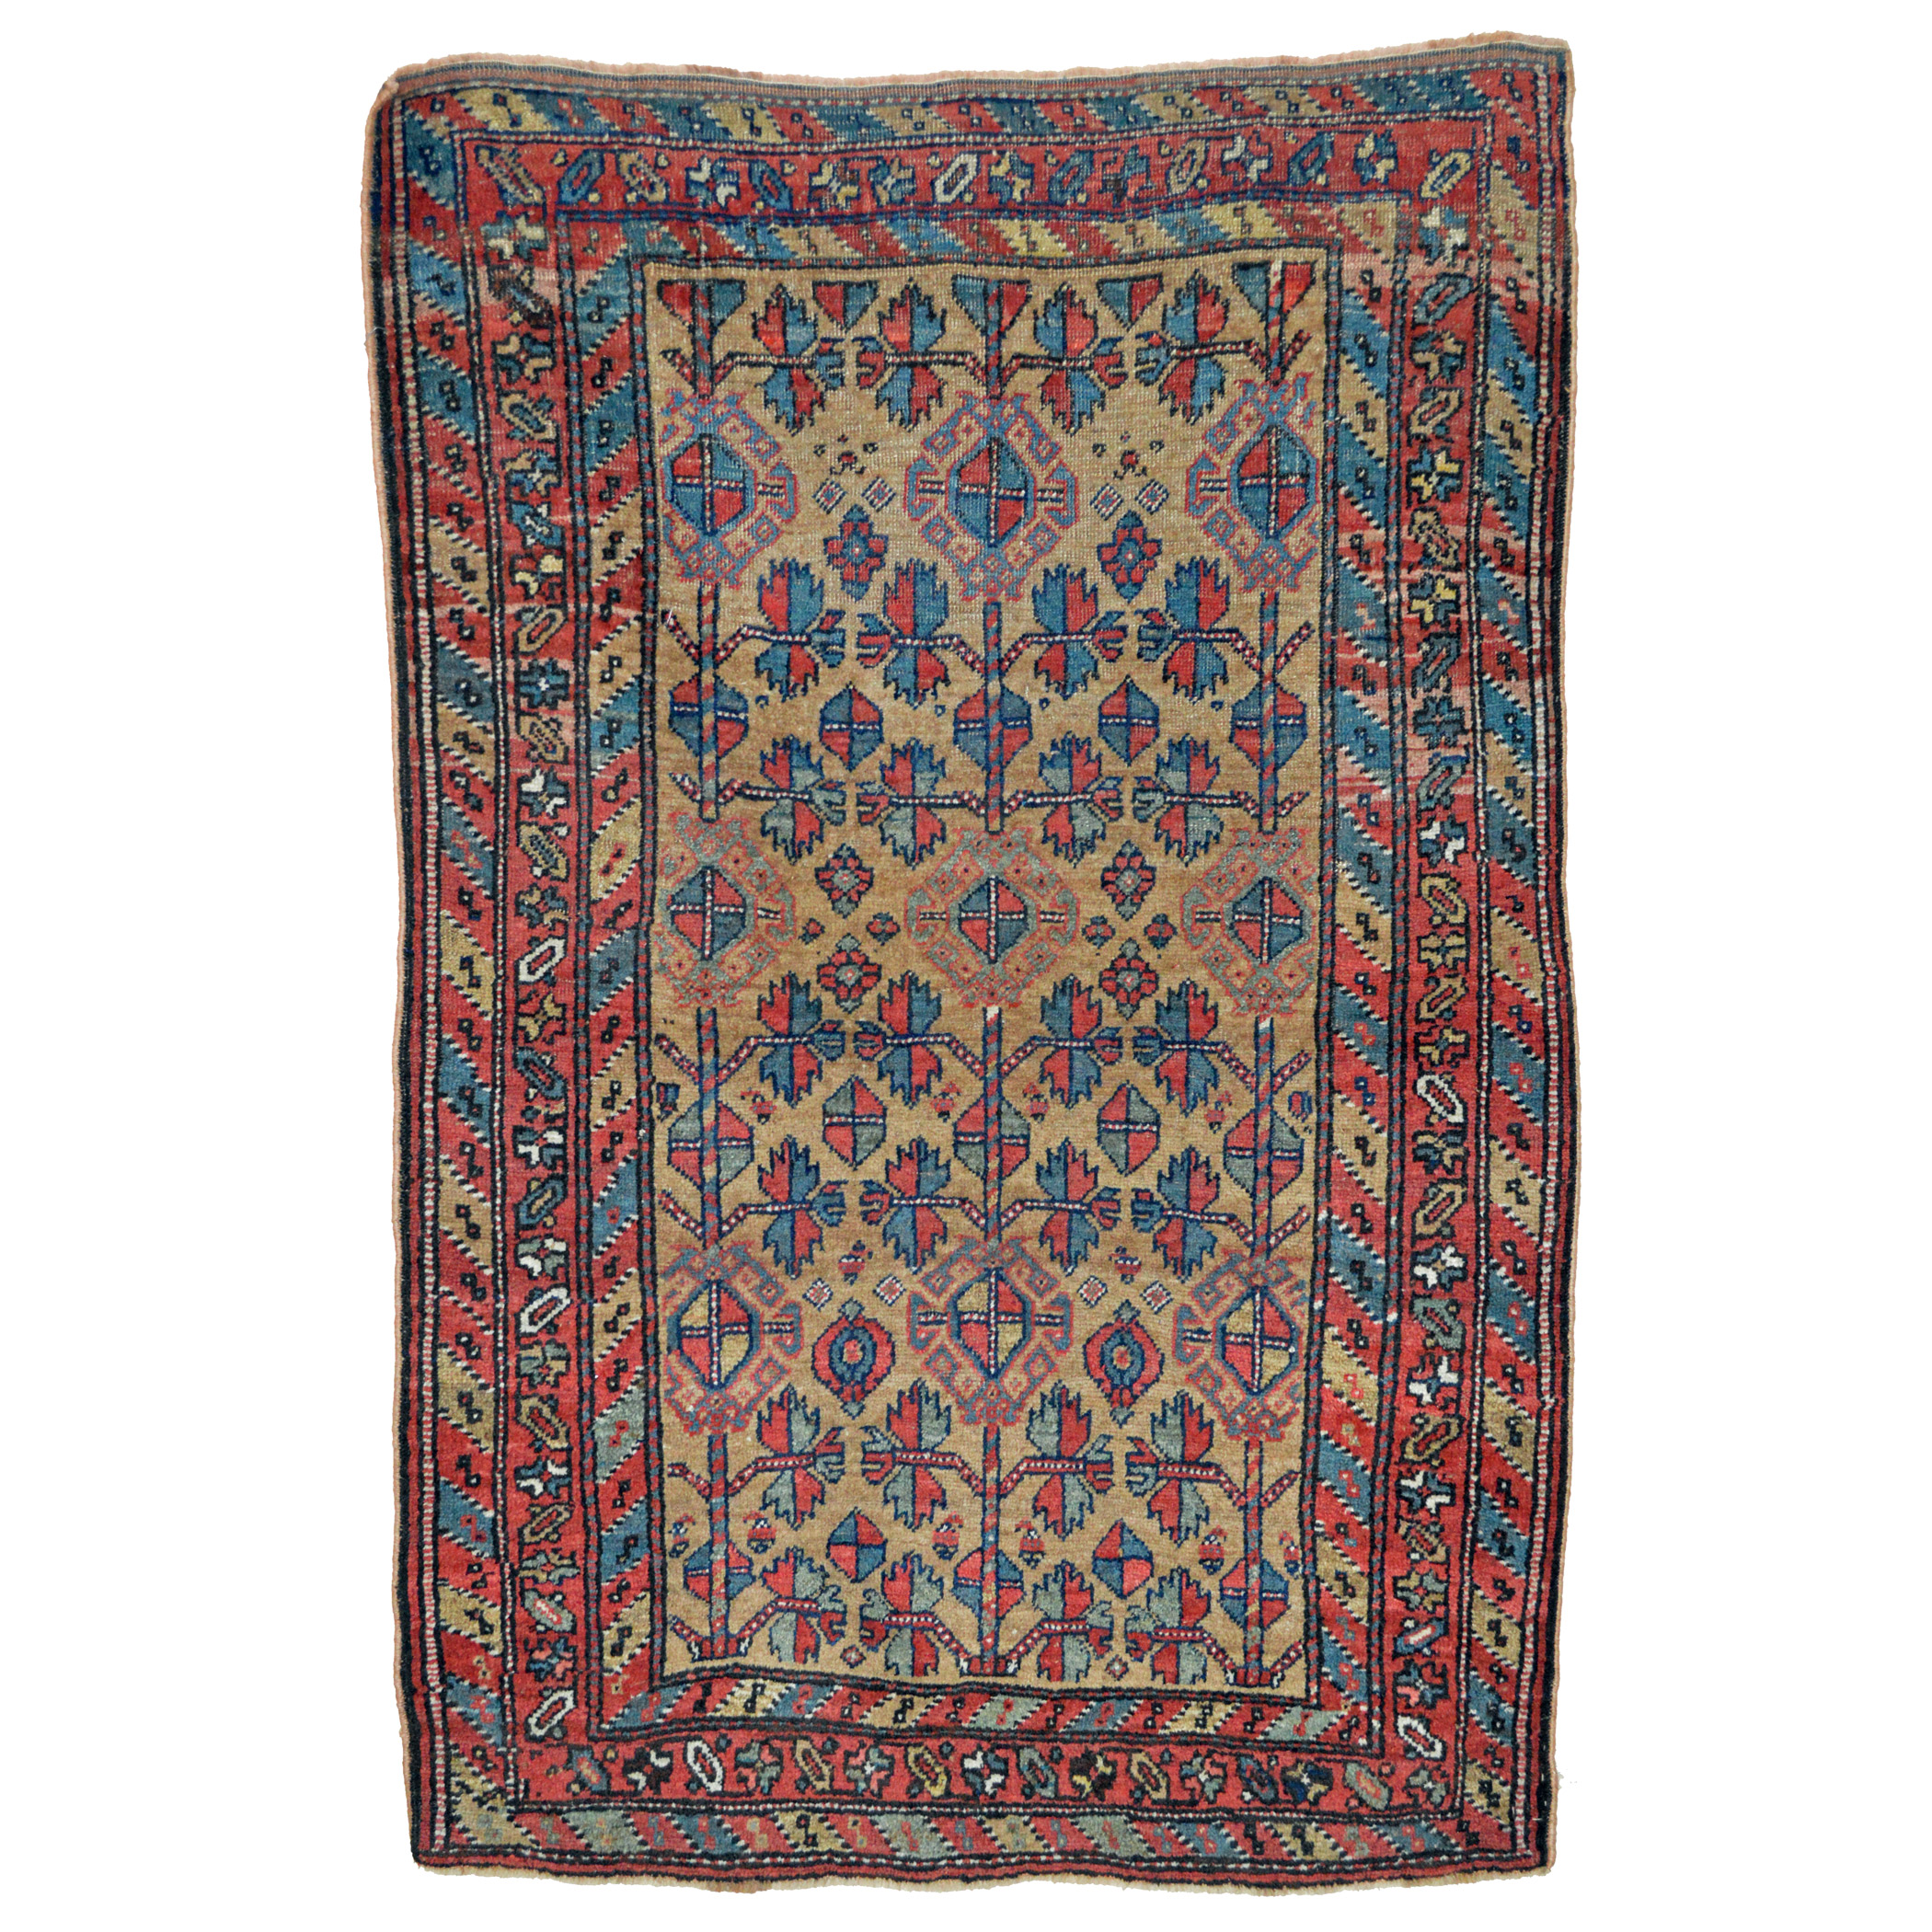 An antique northwest Persian Kurdish tribal rug with stylized leaves and flowers on a camel color field. Diagonal stripe guard borders and an abstract scrolling vine border with leaves and flowers frame the field, circa 1900. Douglas Stock Gallery offers a selection of antique Persian tribal rugs including antique Kurdish rugs, antique Afshar rugs, antique Bakhtiari rugs and antique QashQa'i rugs, antique tribal rugs Boston,MA area, antique tribal rugs Cambridge, Brookline, Newton, Belmont, Concord, Needham, Natick,MA area - antique Oriental rugs for interior designers and decorators, antique rug for new collectors